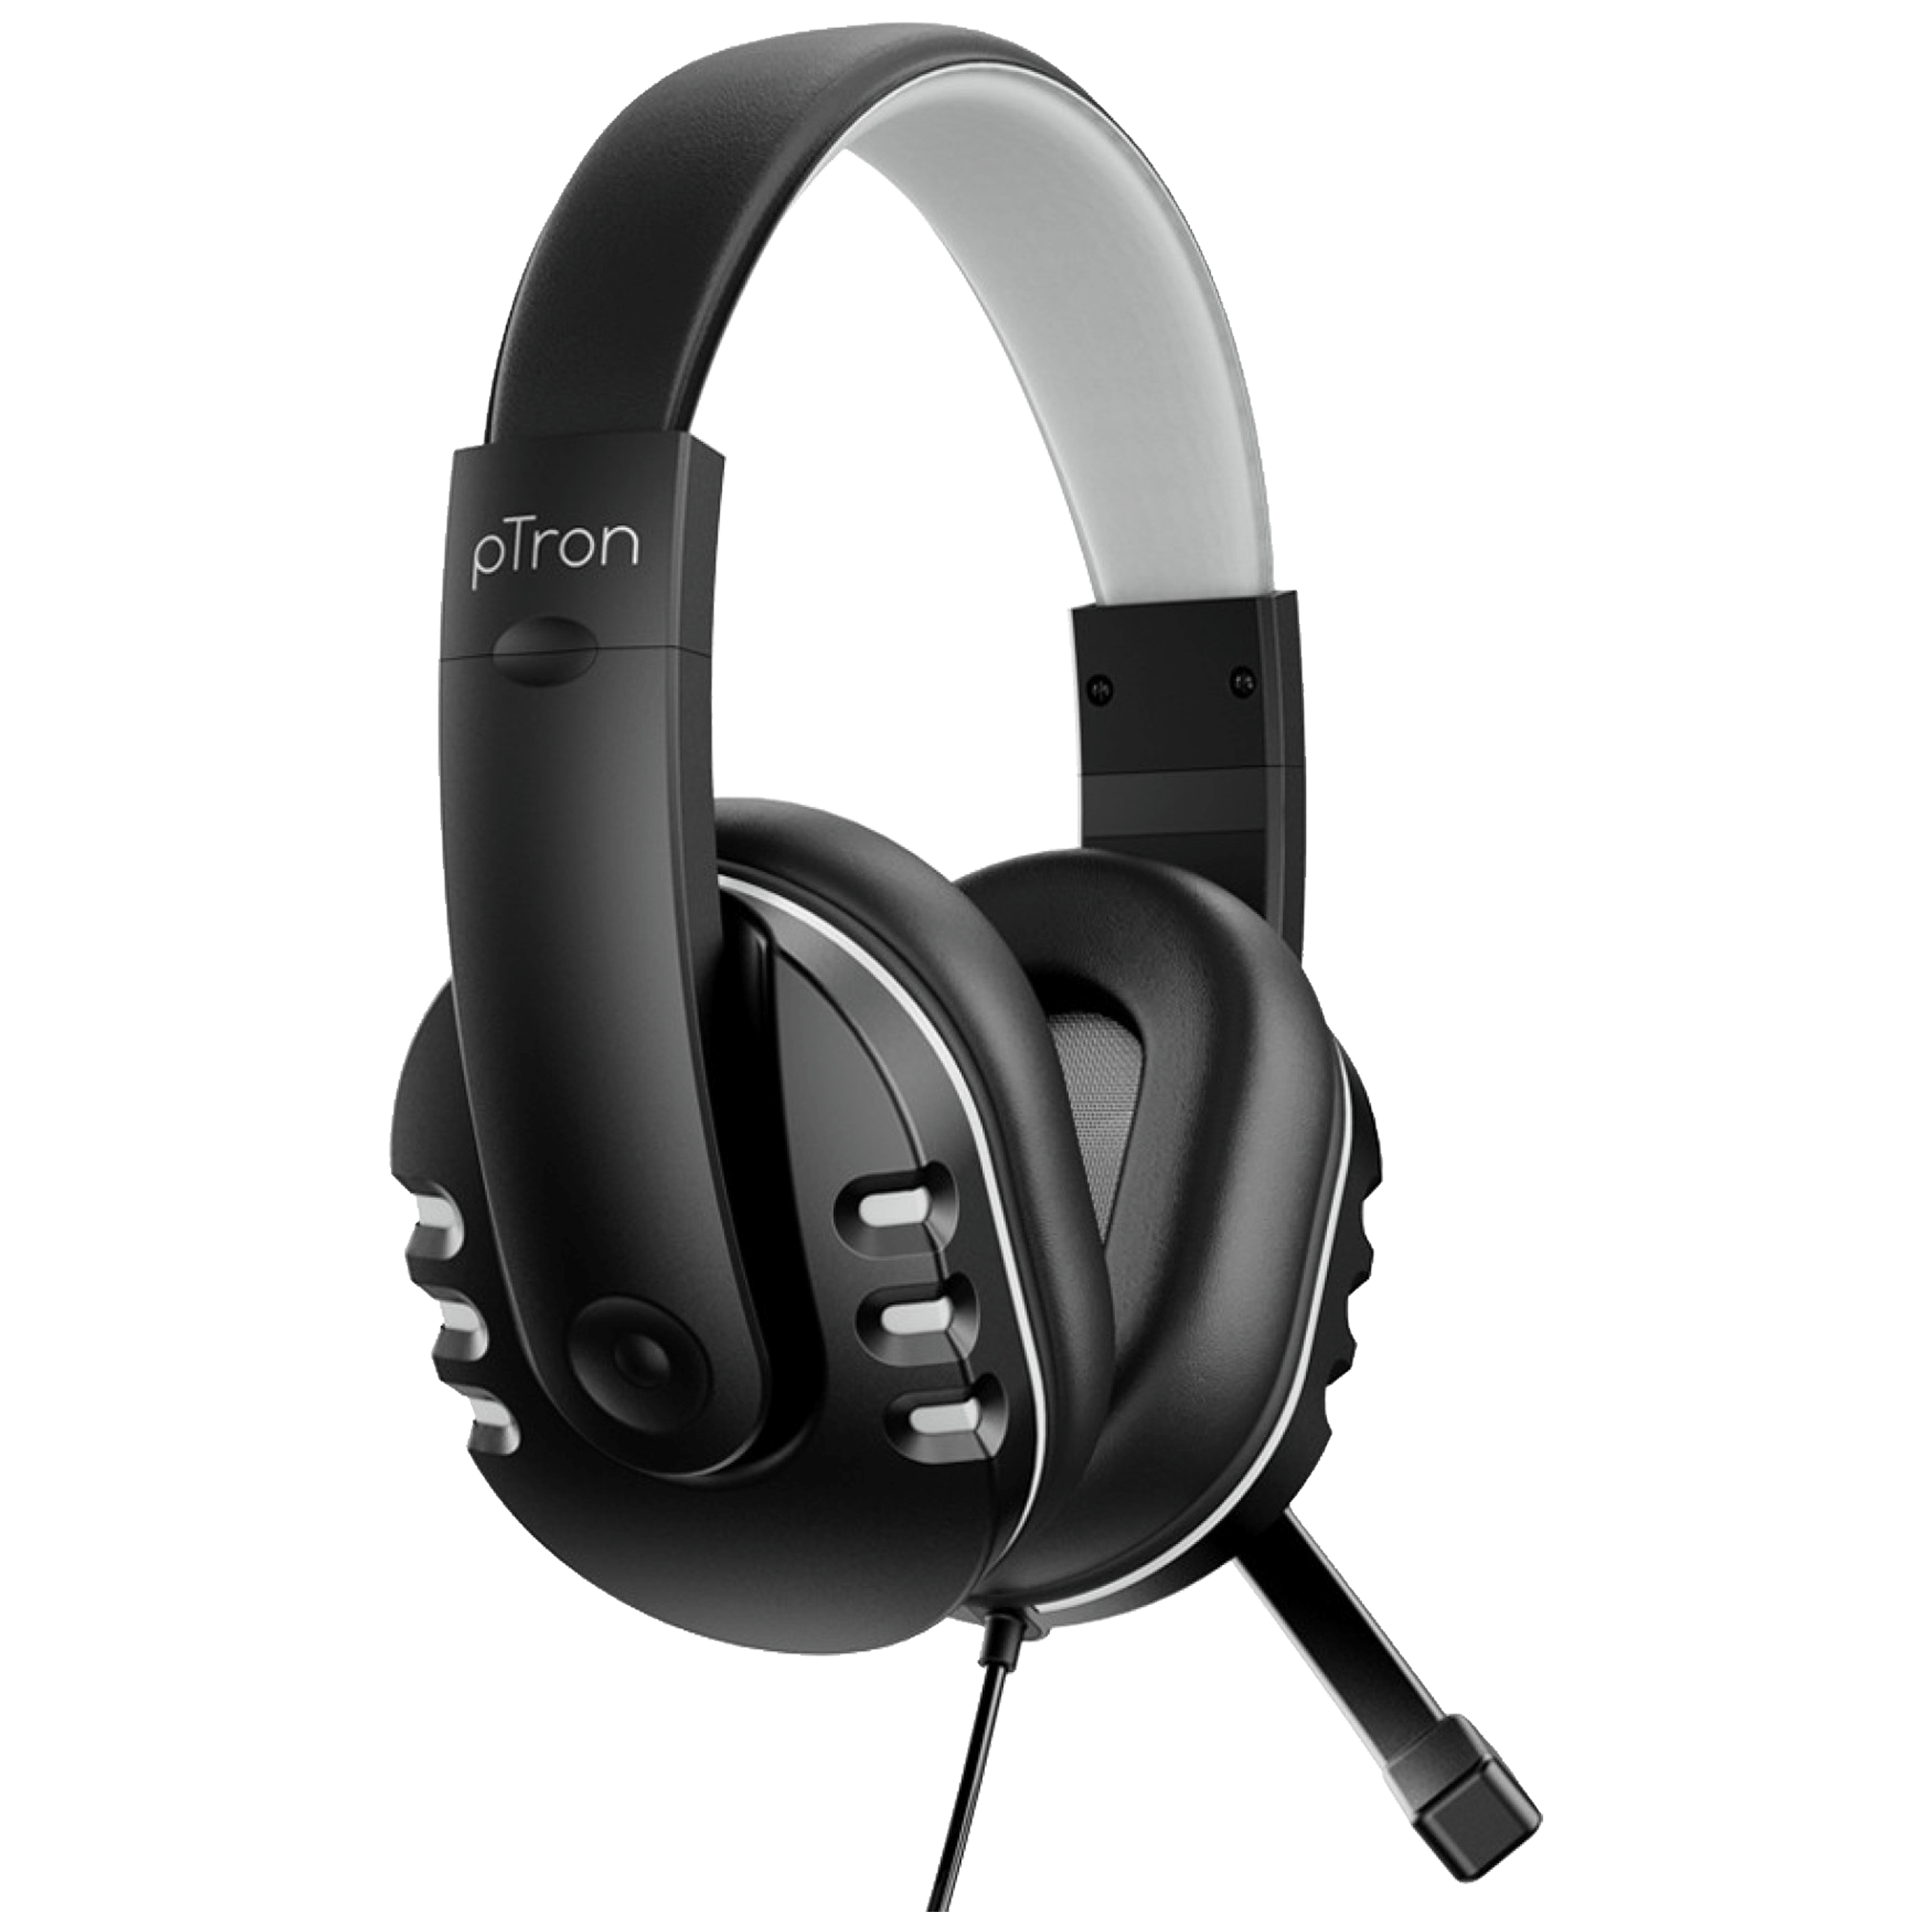 PTron - pTron Soundster Arcade Over-Ear Wired Gaming Headphone with Mic (Hi-Fi Stereo Sound, 140317987, Black)